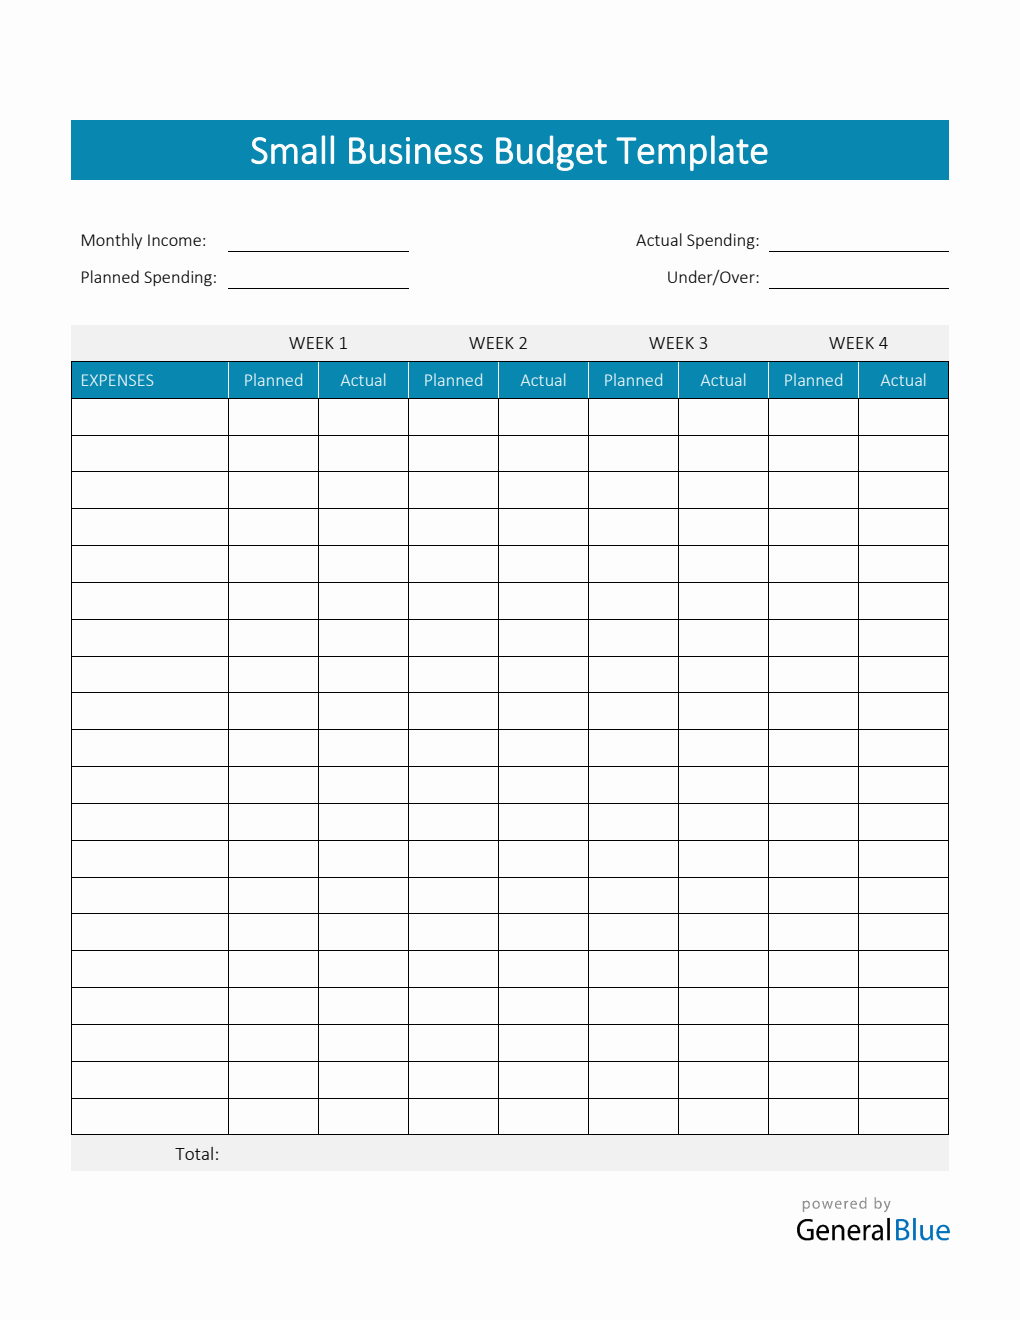 Small Business Budget Template in PDF (Colorful)